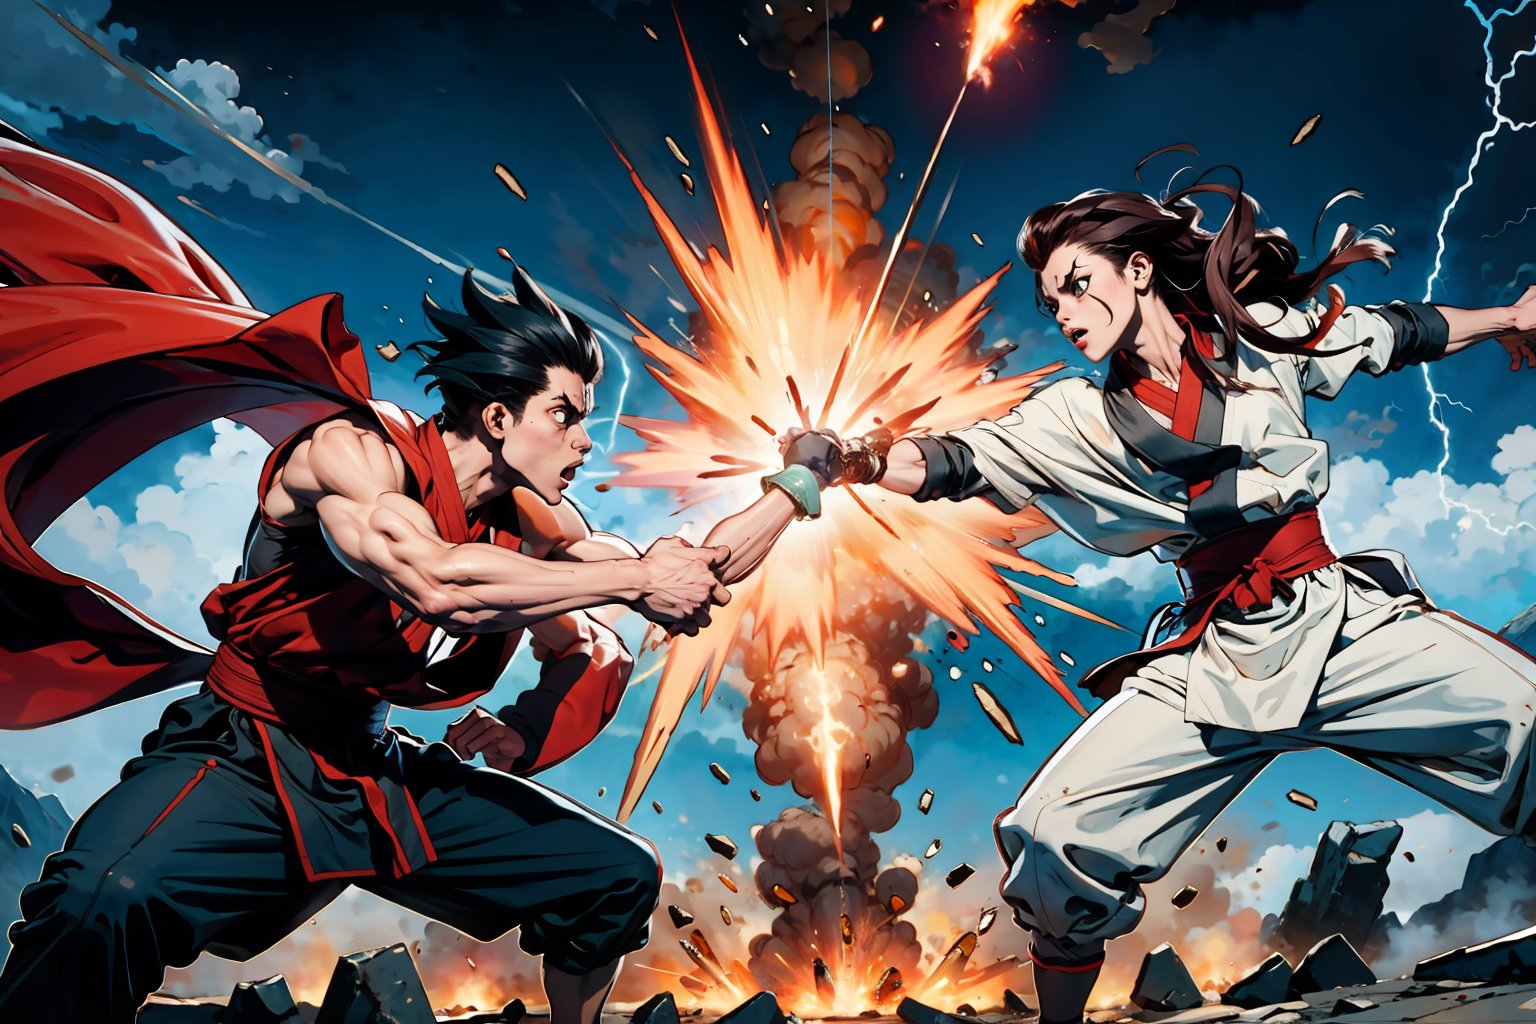 A shocked expression spreads across the faces of the gods as they gaze upon a dramatic scene unfolding before them. In a burst of dynamic energy, a group of skilled warriors engage in a thrilling battle sequence, reminiscent of Chinese martial arts animations. The bold lines and vibrant colors of Boichi's manga style bring the action to life, with lightning-fast movements and intense poses capturing the attention of all who witness this awe-inspiring spectacle.